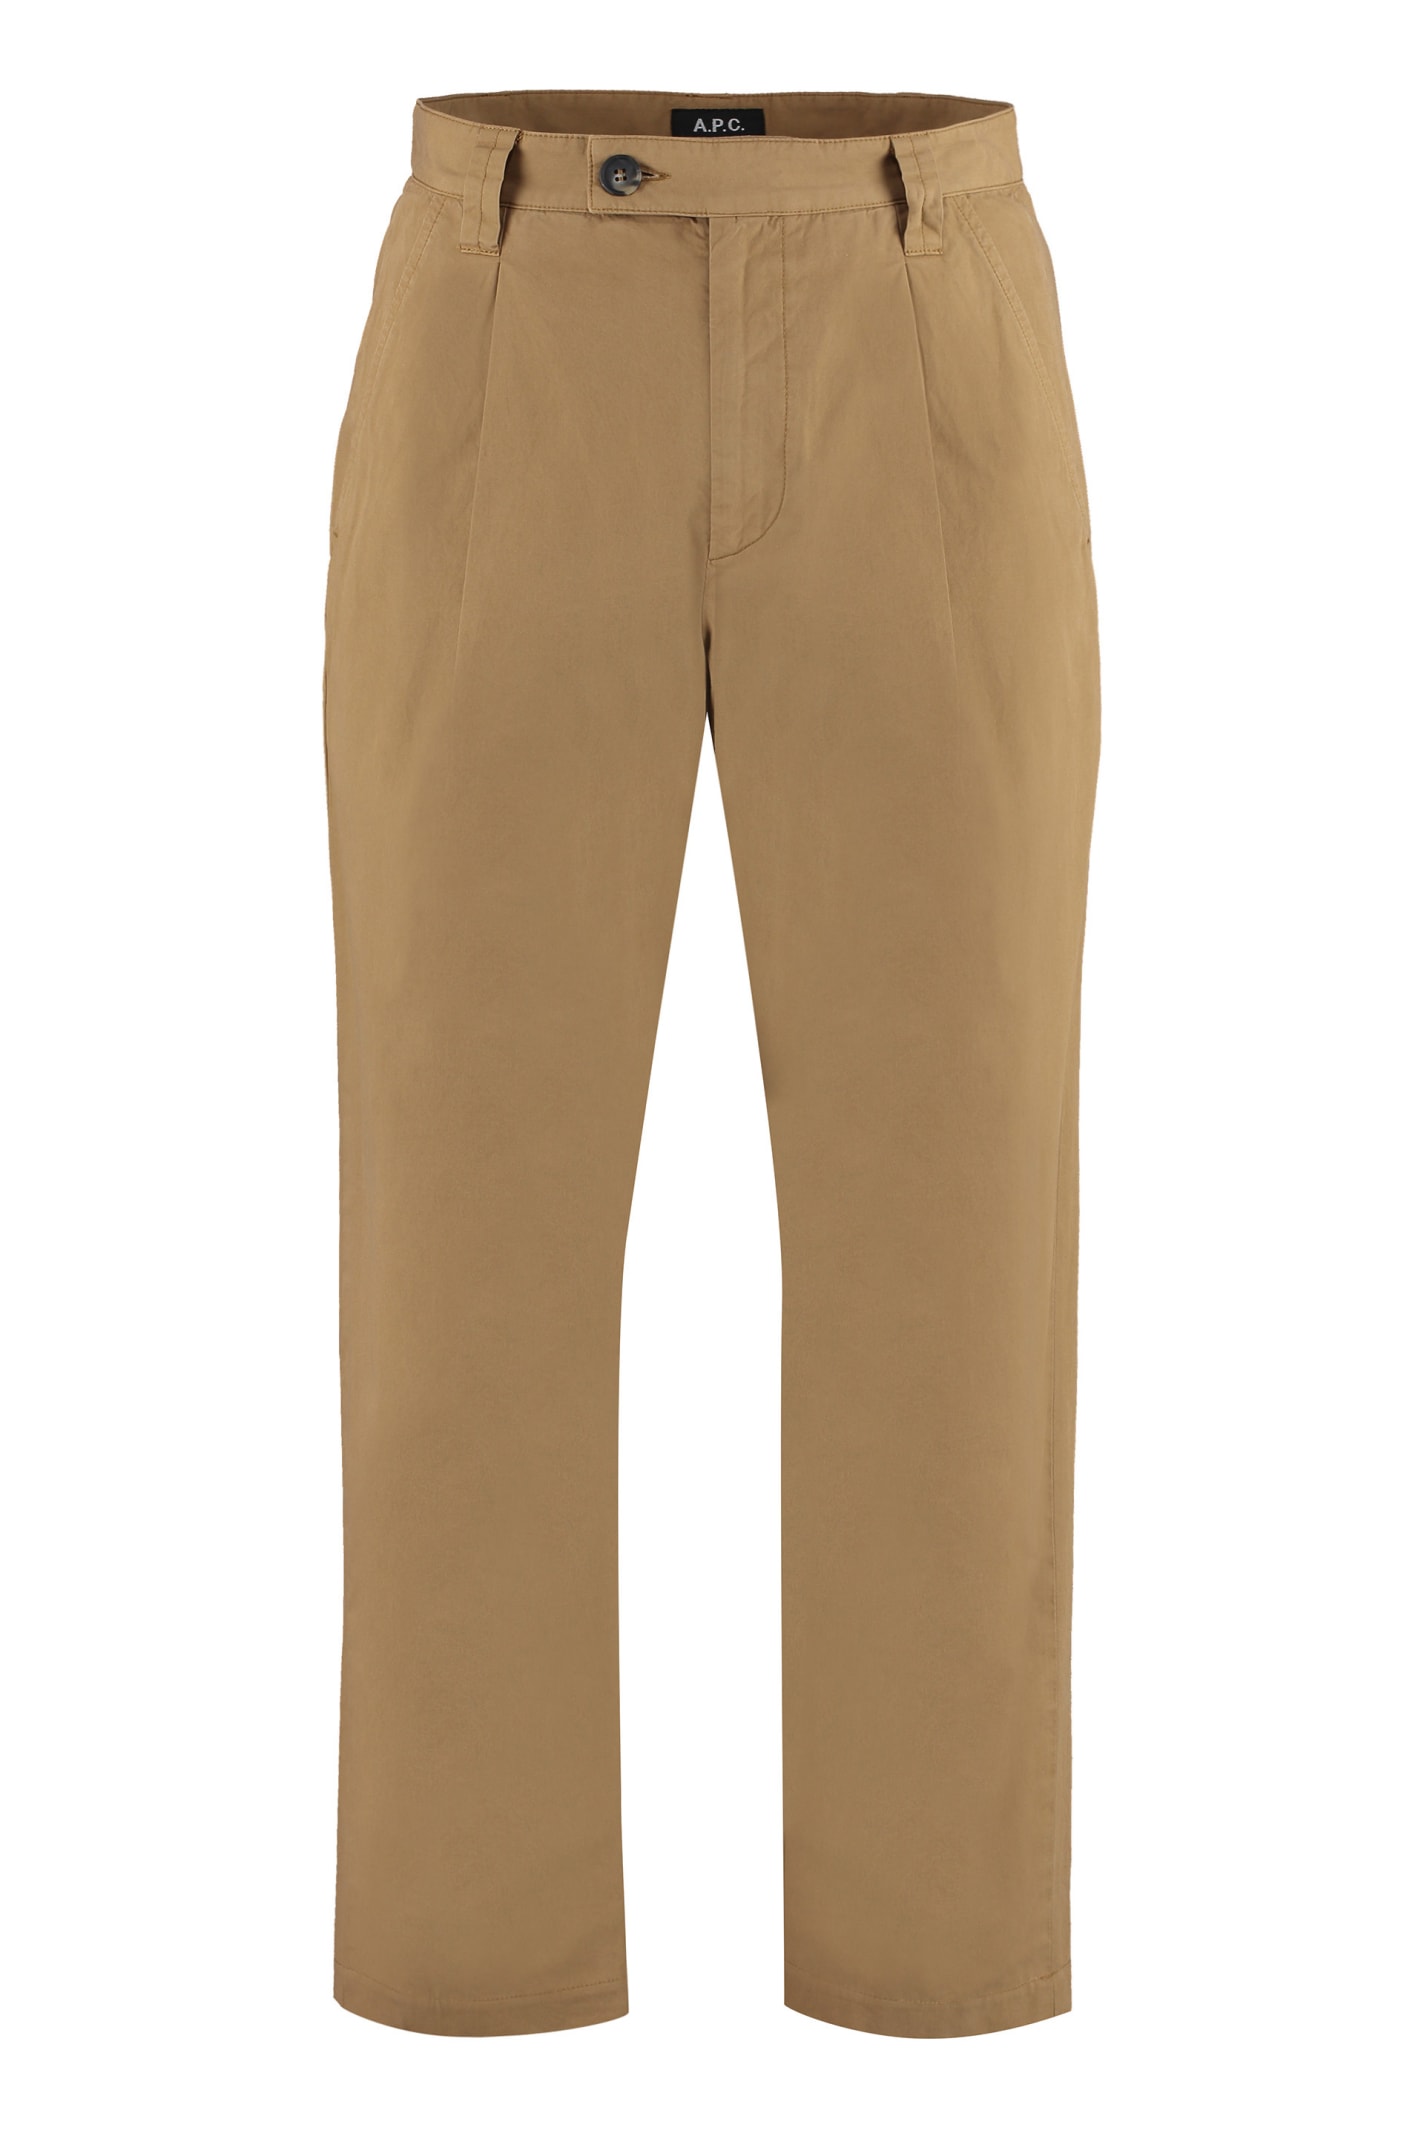 Shop Apc Cotton Chino Trousers In Cag Tabac